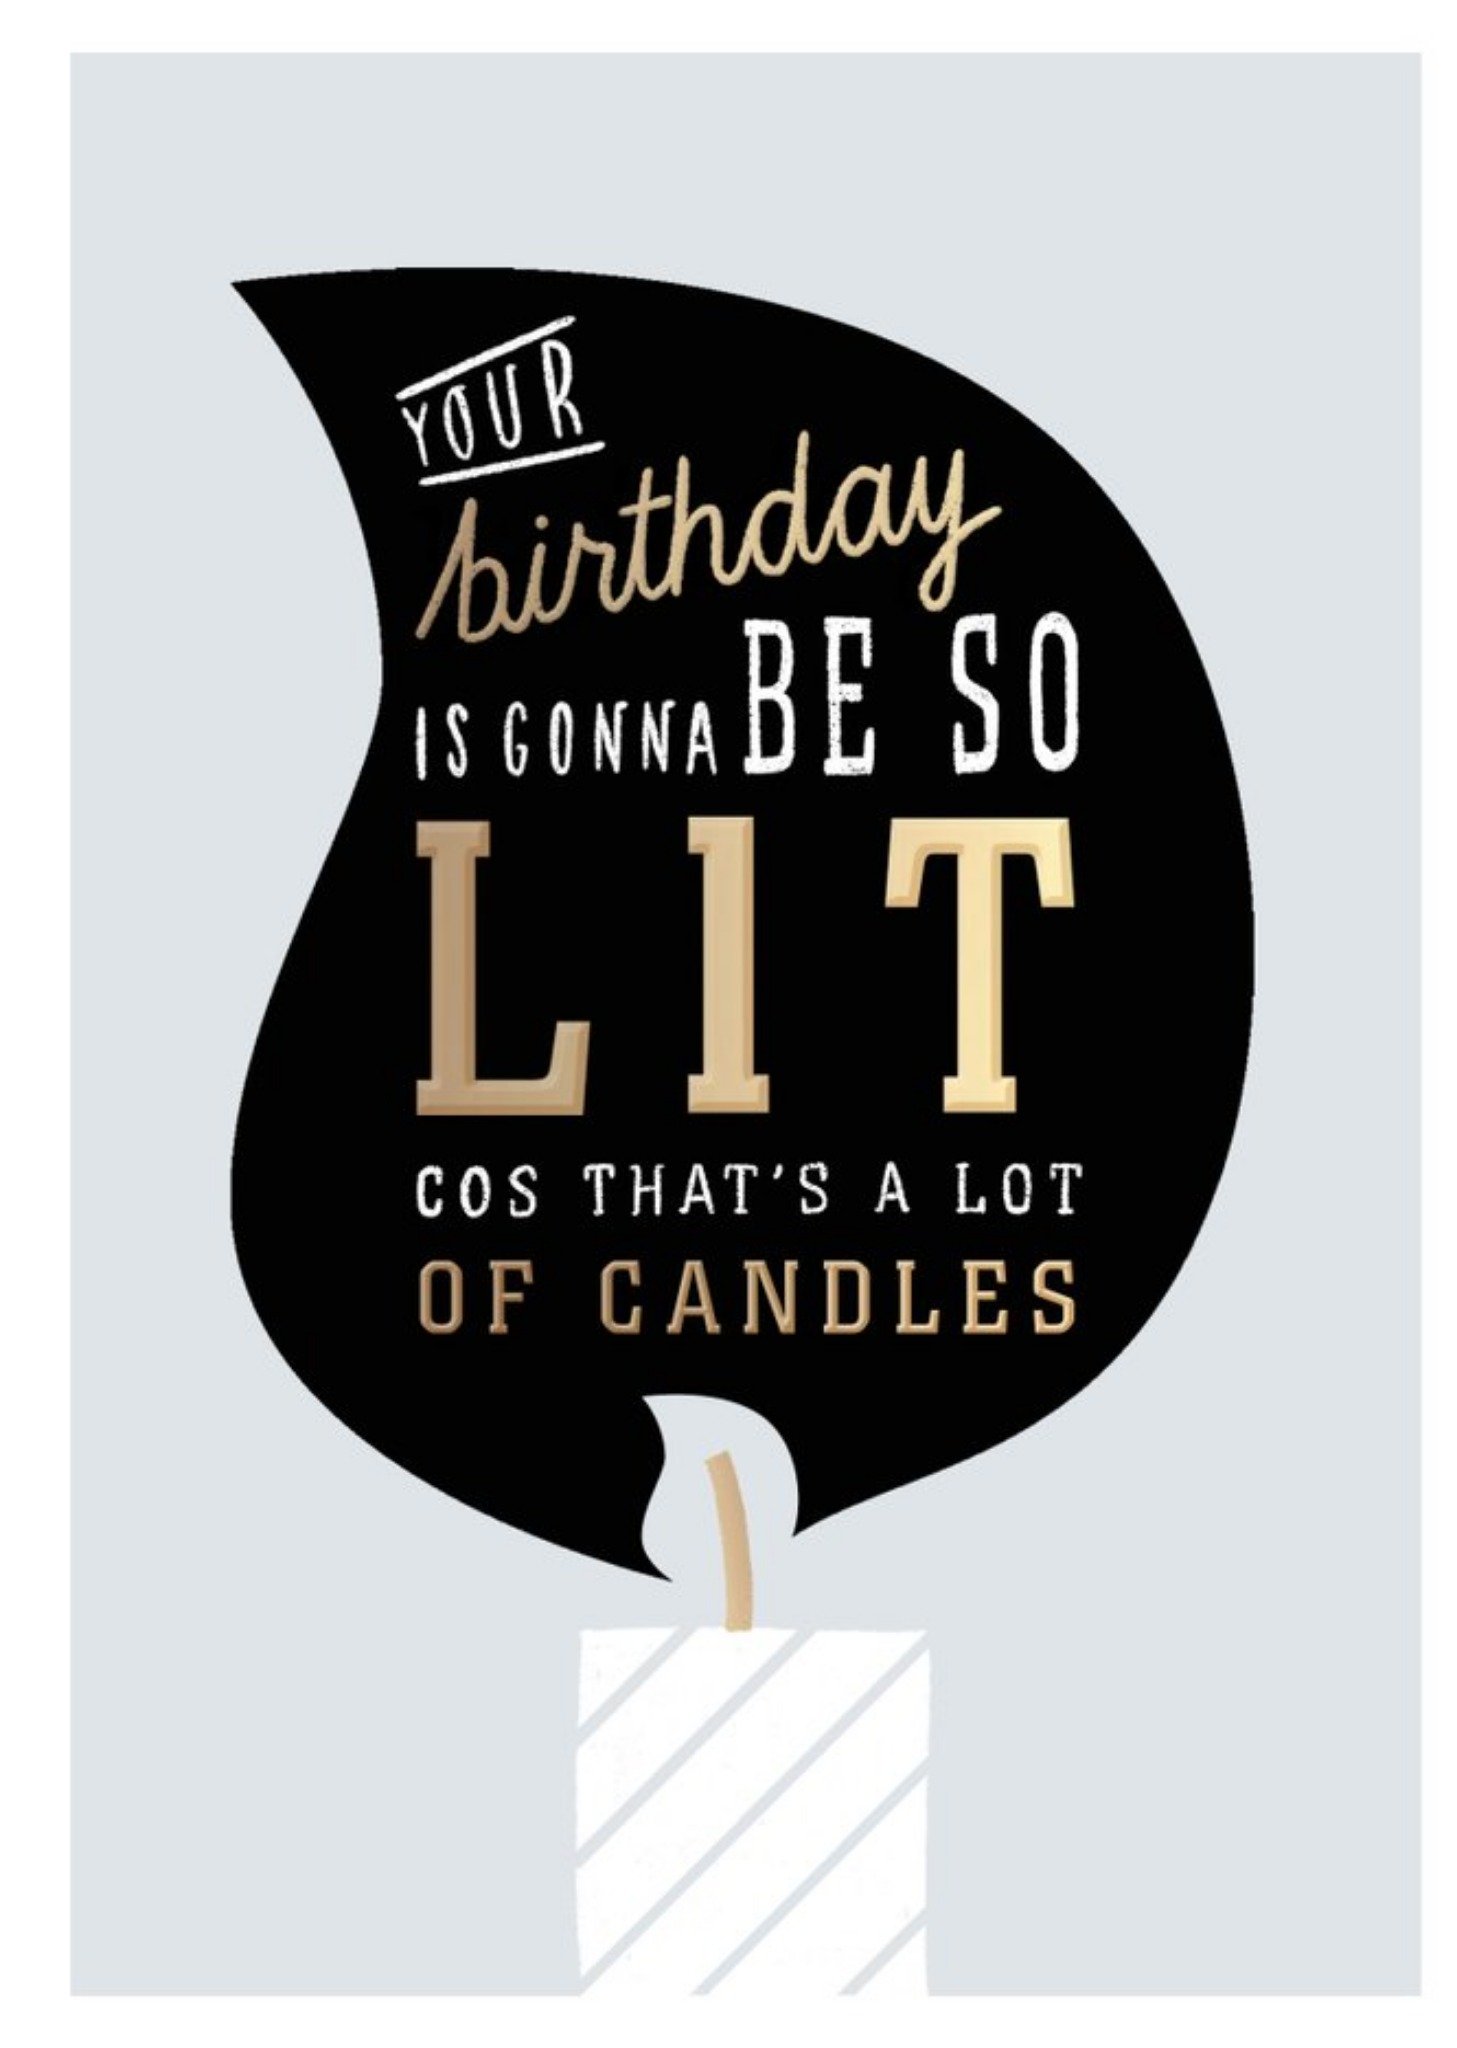 Moonpig Your Birthday Is Gunna Be So Lit Funny Candles Card, Large